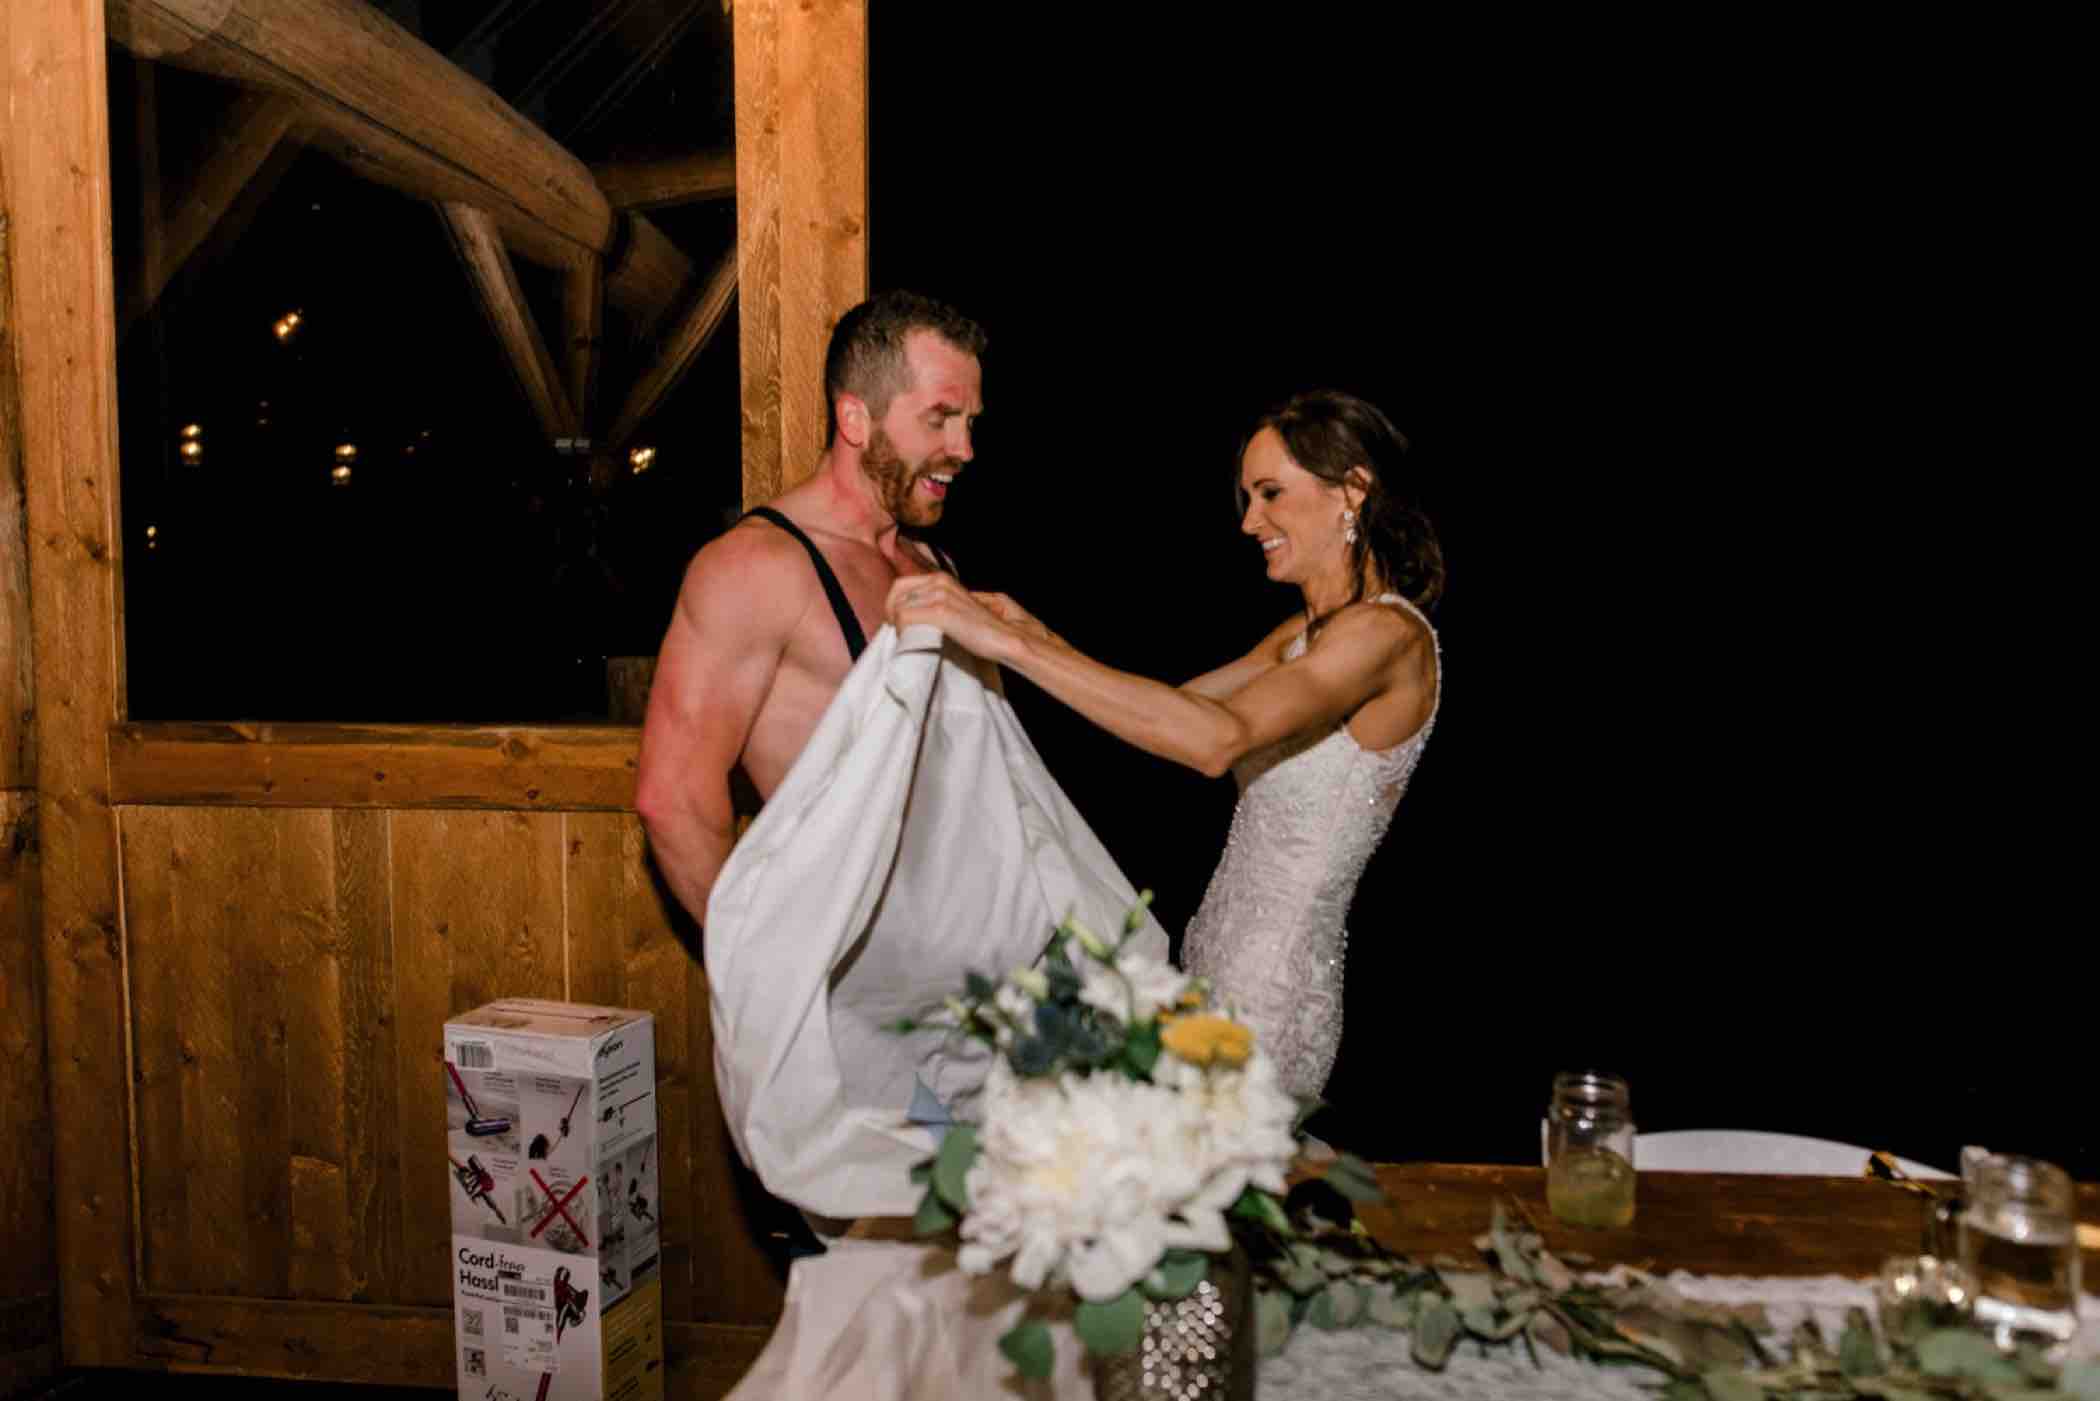 Sallie tries to cover up Kris during their wedding reception at Piney River Ranch in Vail, Colorado. Photo by Ali and Garrett, Romantic, Adventurous, Nostalgic Wedding Photographers.